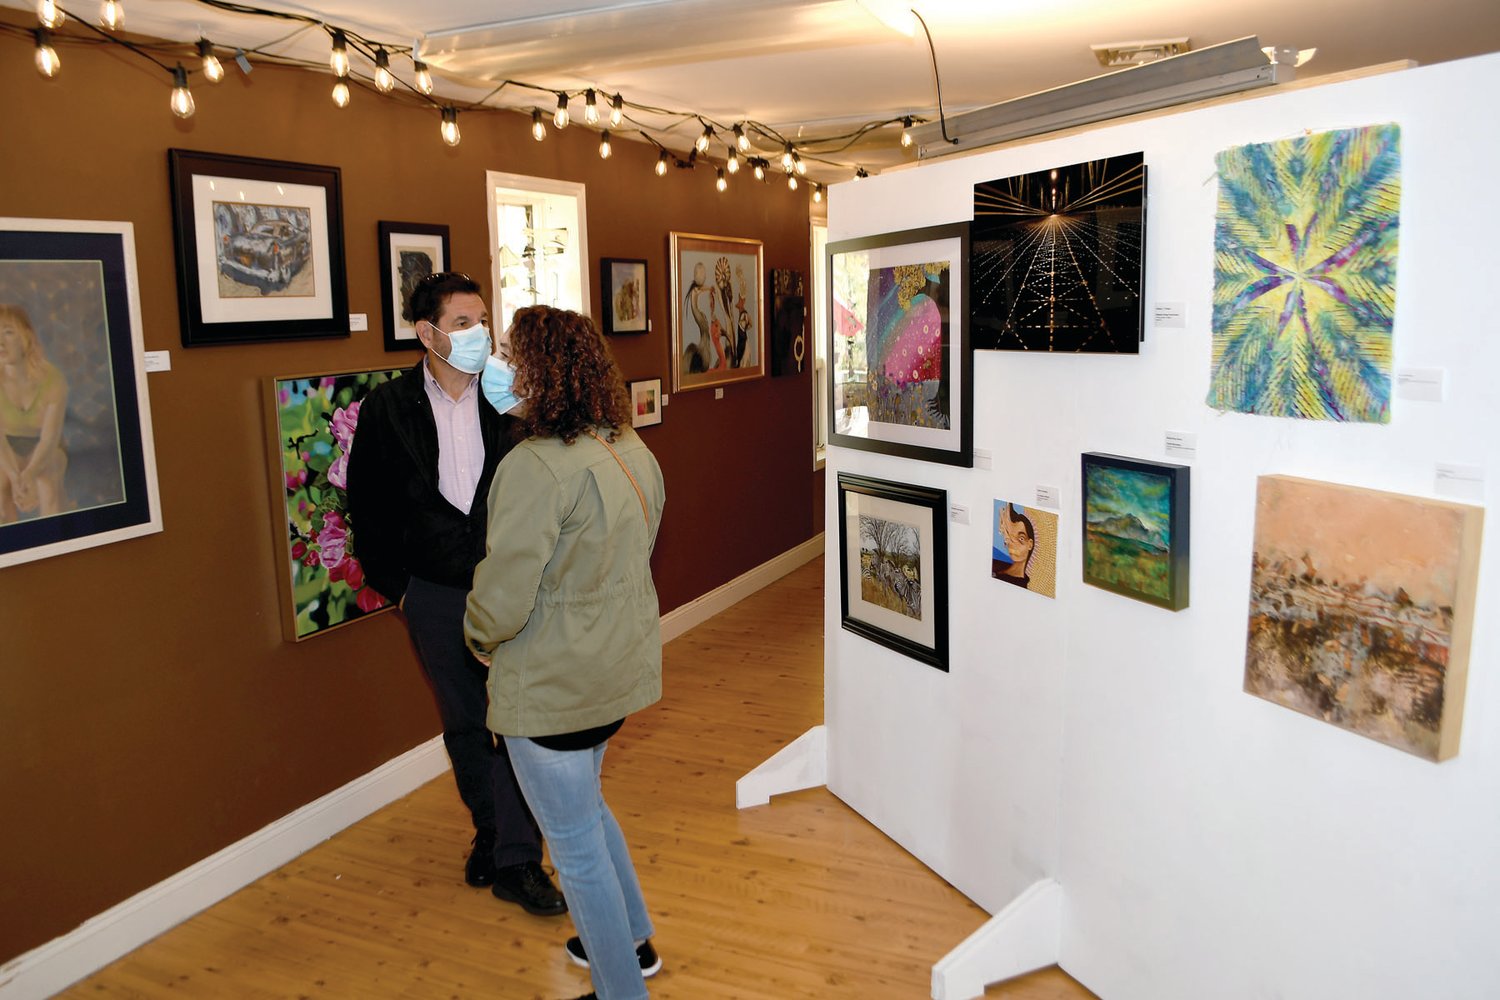 The Salon on Kingwood Avenue showcases part of the juried exhibition, which includes over 100 works of art and craft by emerging and experienced makers in and around the Delaware River Valley.